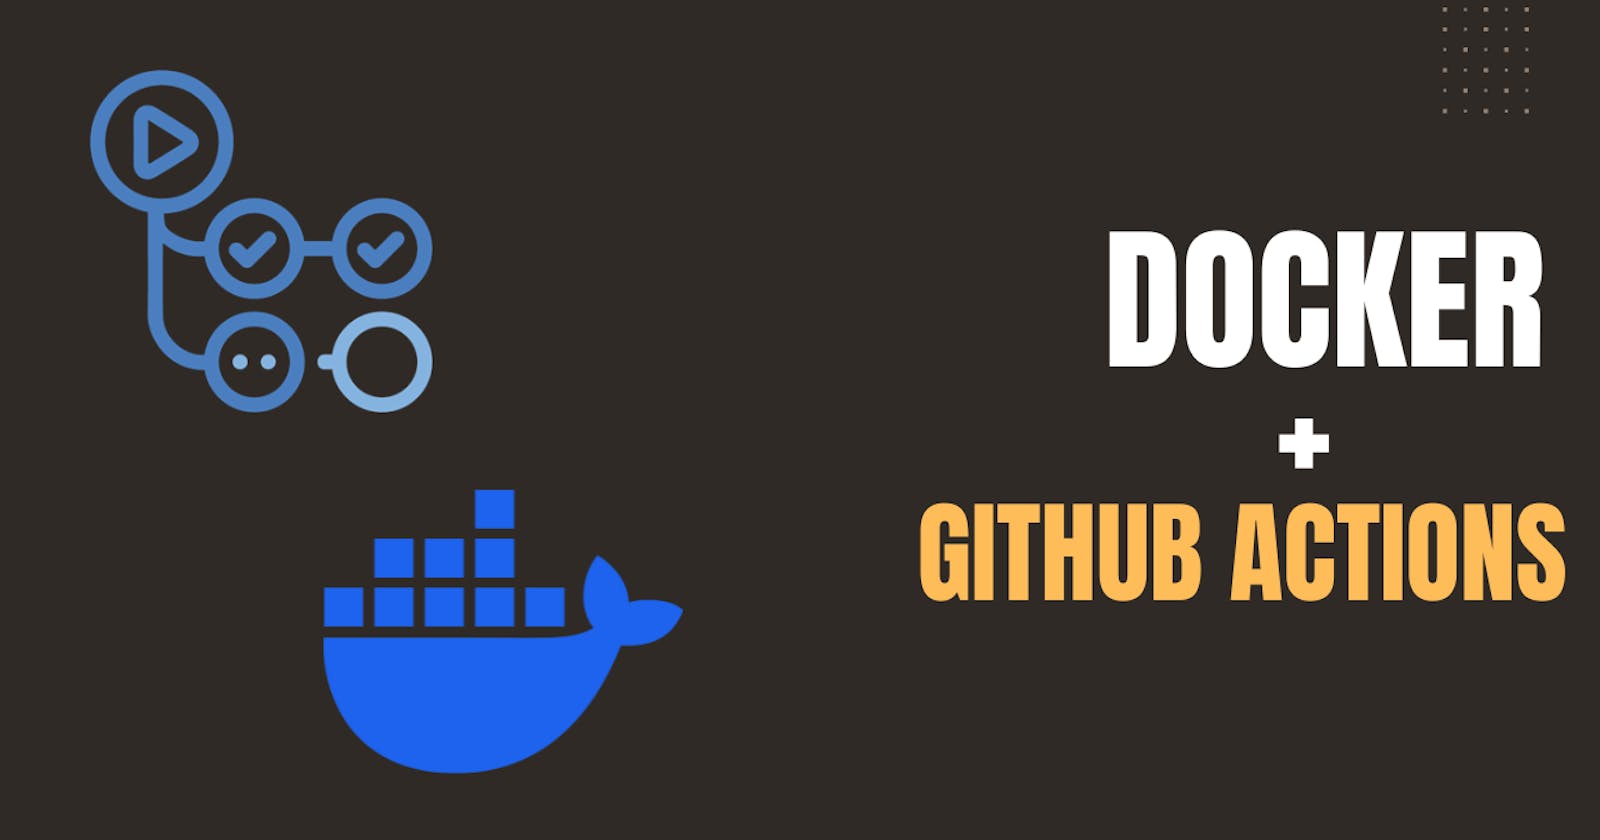 Docker Image Building , Tagging And Publishing With Github Actions